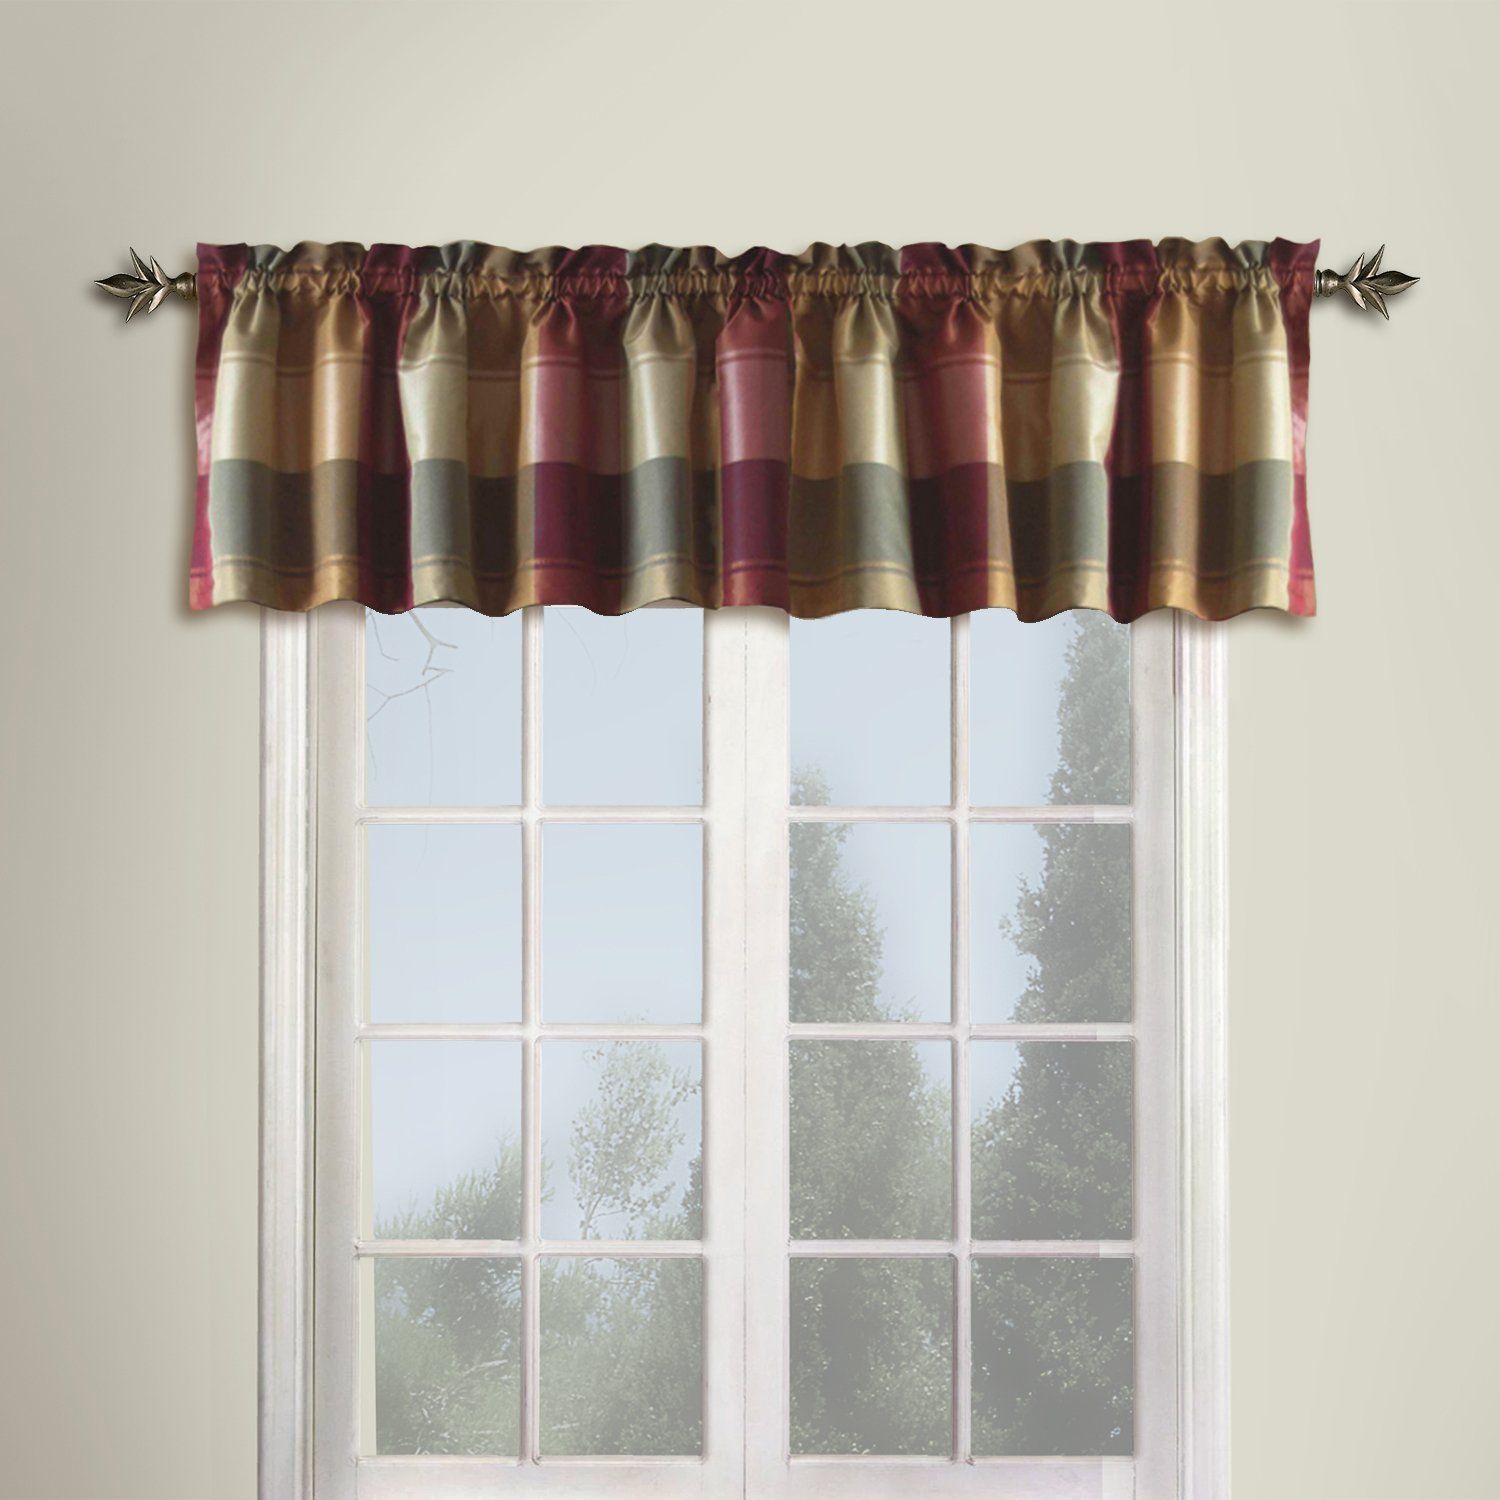 Valance Curtains Bring Personality To Your Home Windows In Burgundy Cotton Blend Classic Checkered Decorative Window Curtains (View 5 of 20)